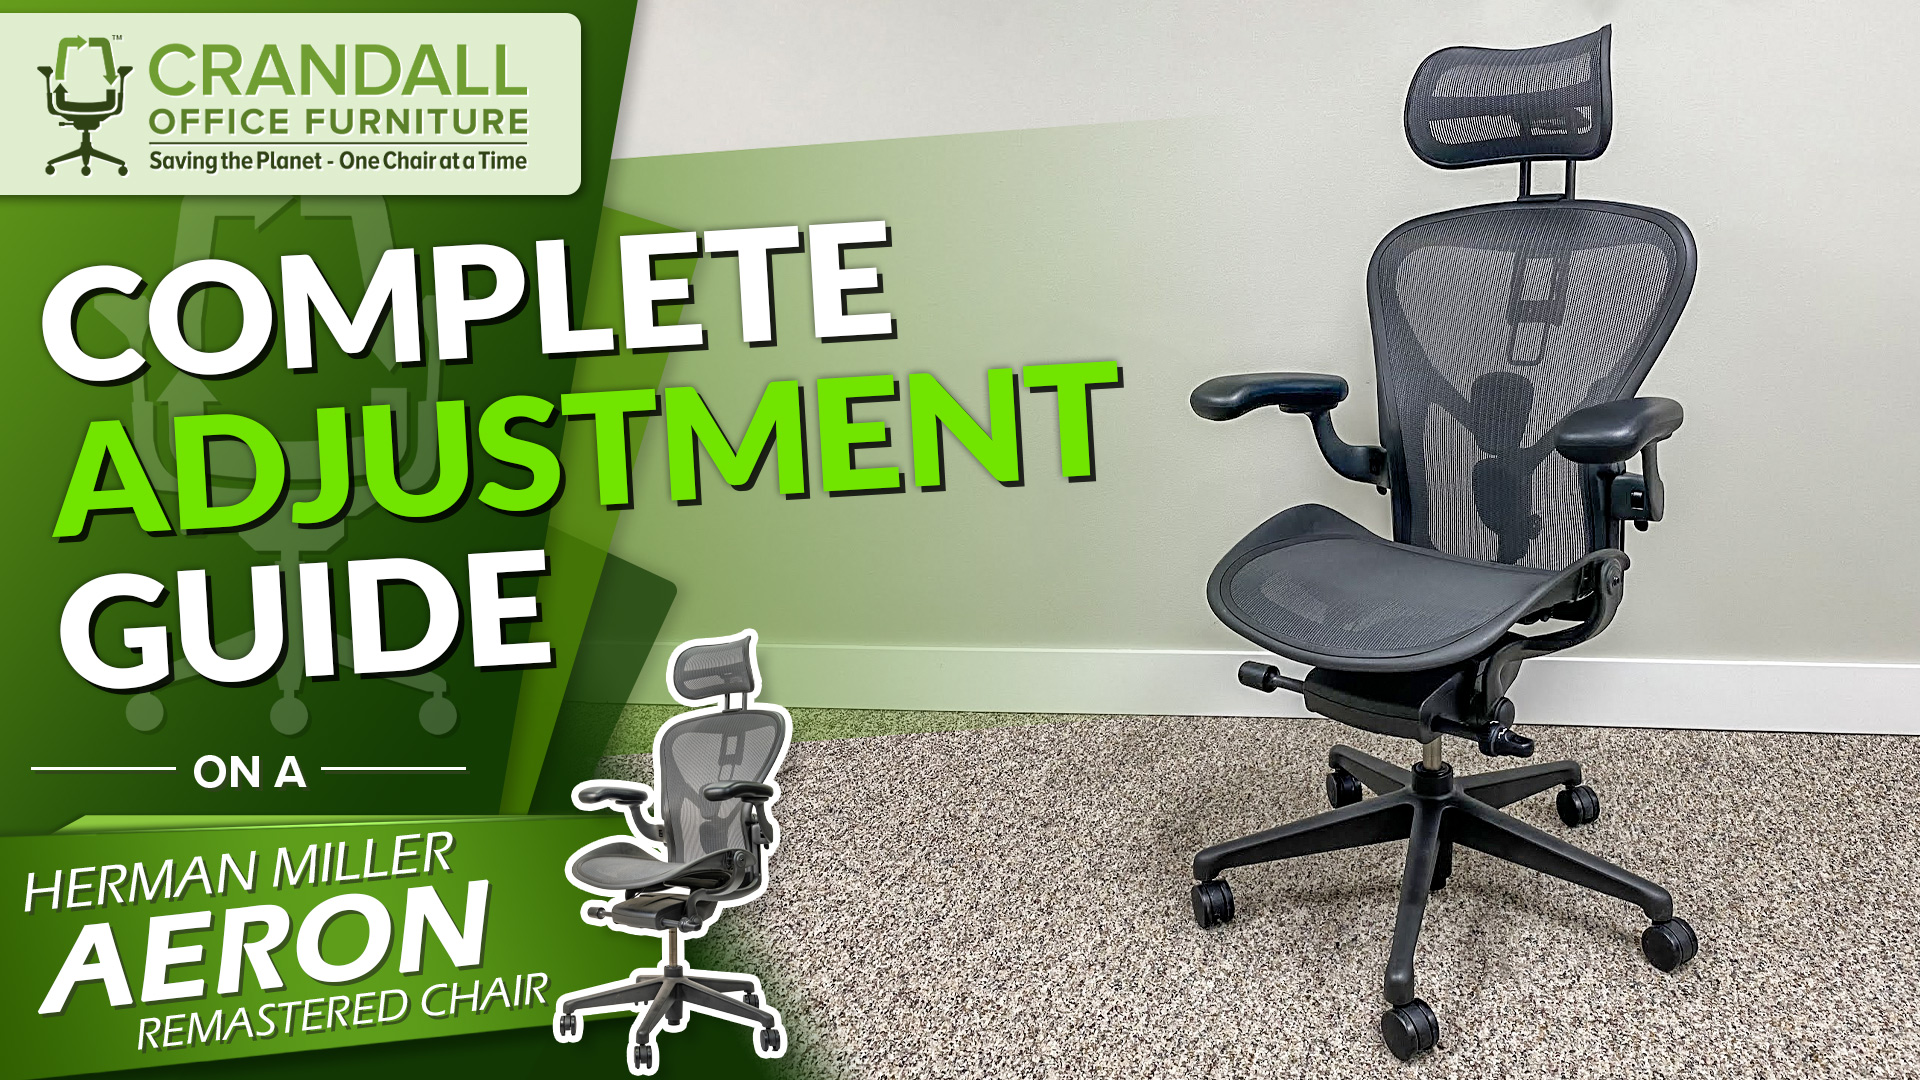 Complete Adjustment Guide For The Miller Aeron Remastered Crandall Office Furniture